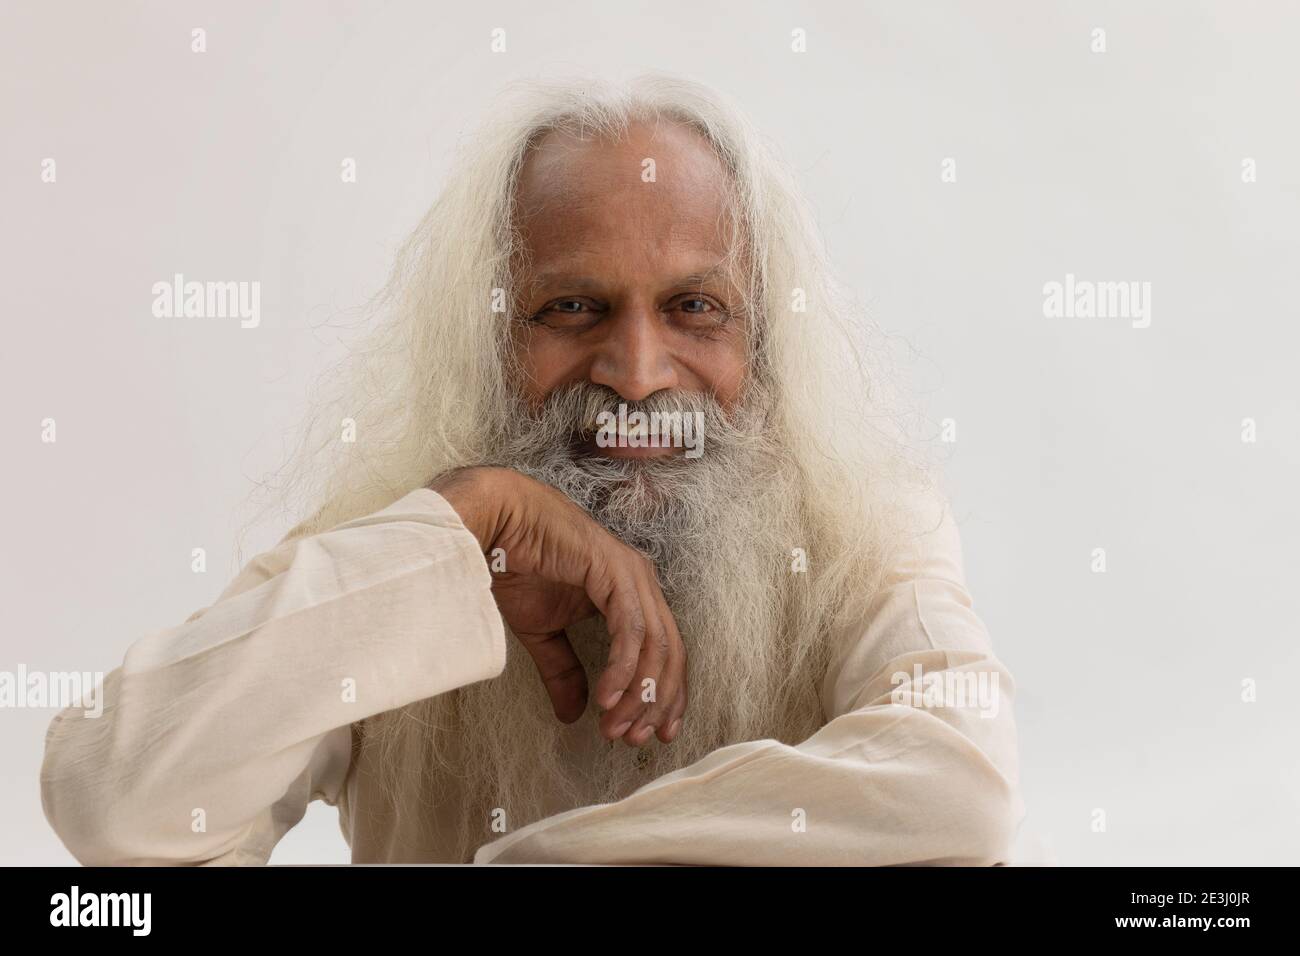 PORTRAIT OF AN OLD MAN WITH WHITE LONG HAIR Stock Photo